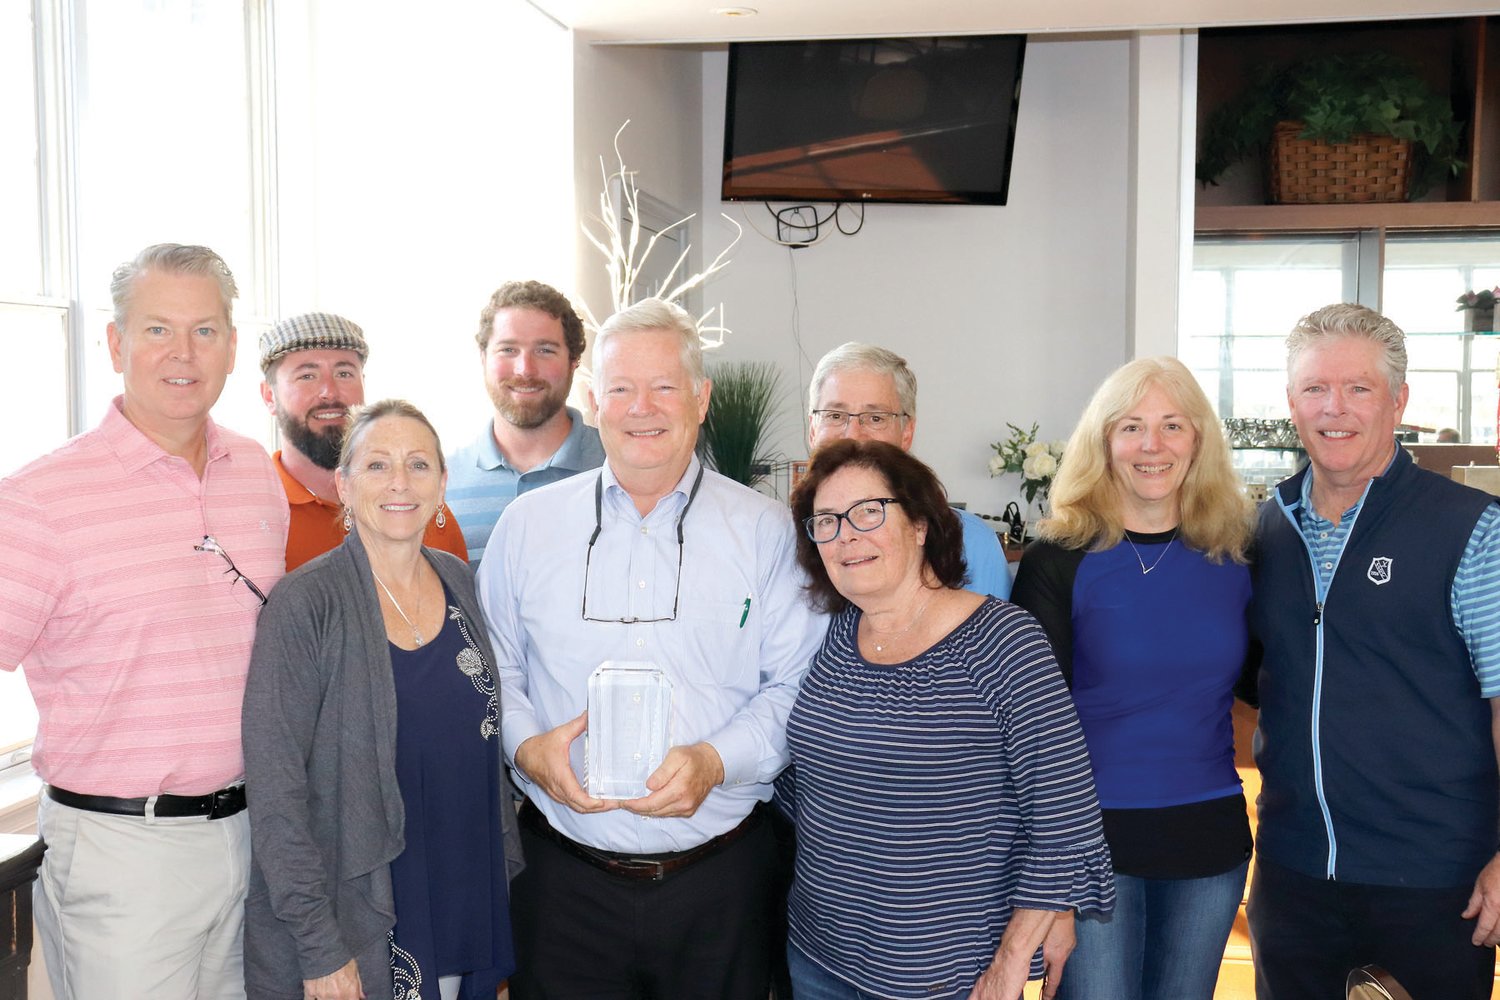 Leo Quinn, center, surrounded by his family, was recently presented with the 2020 Lois Burpee Service award for his dedicated service to the YMCA 
of Bucks County.